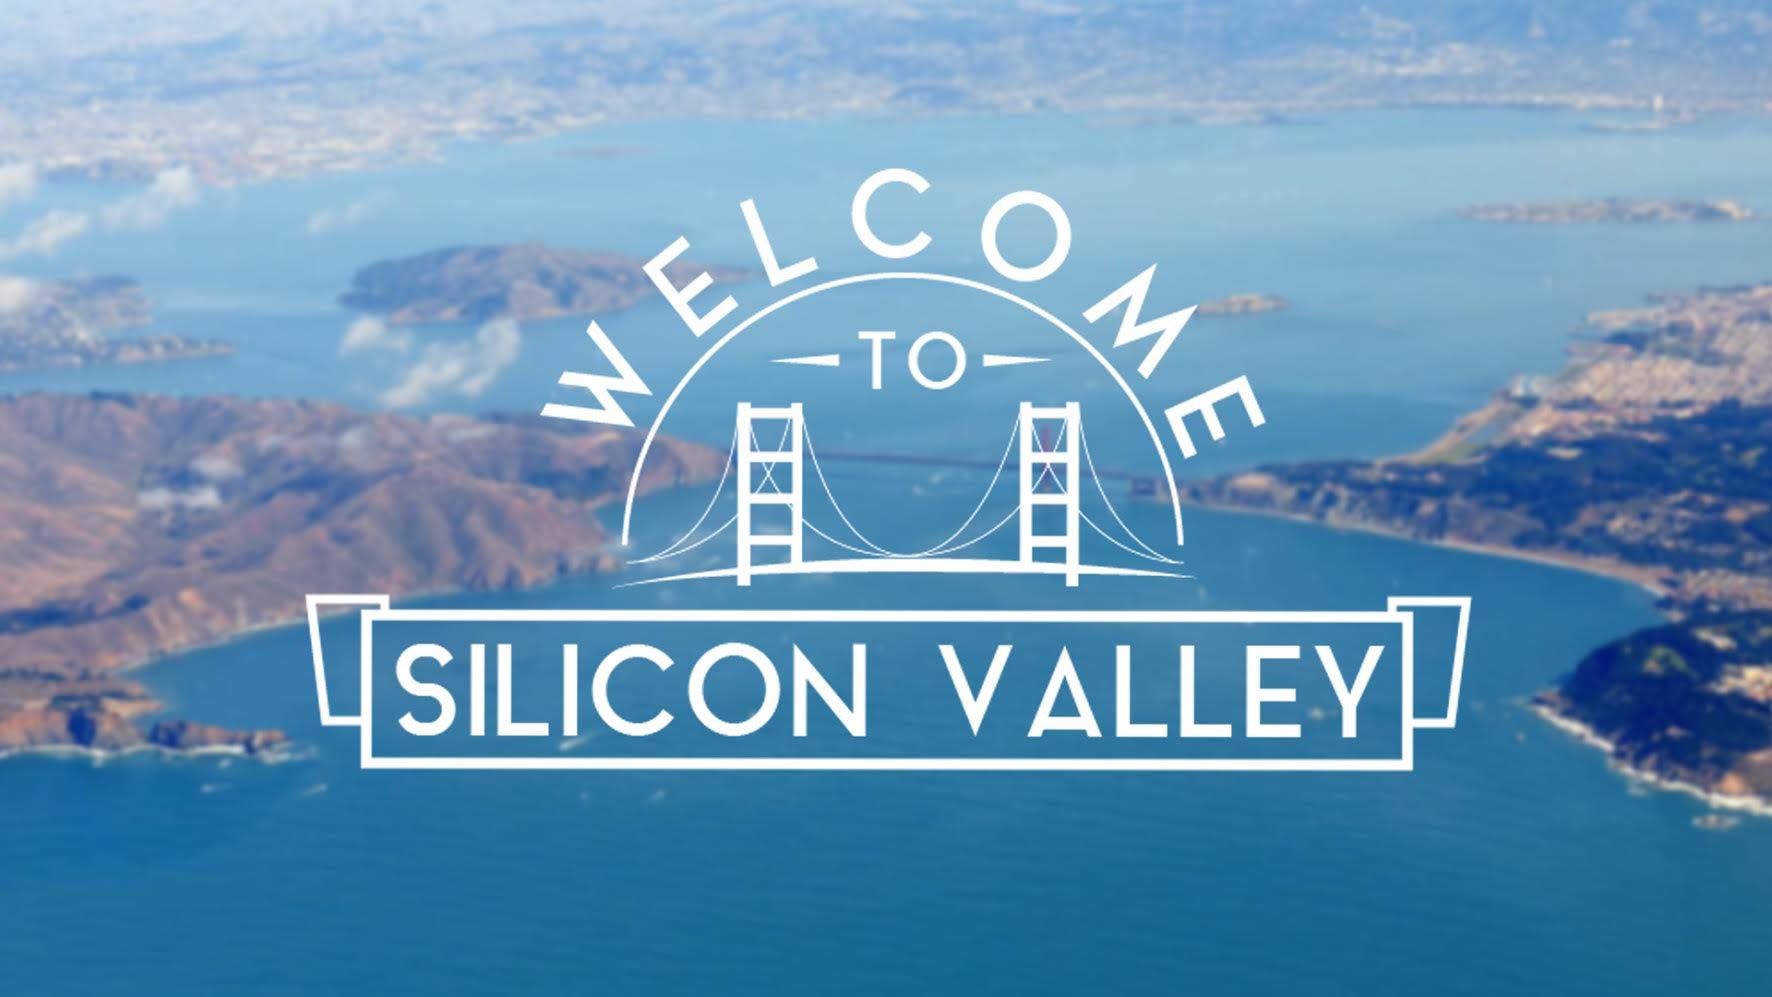 Nice wallpapers Silicon Valley 1772x997px